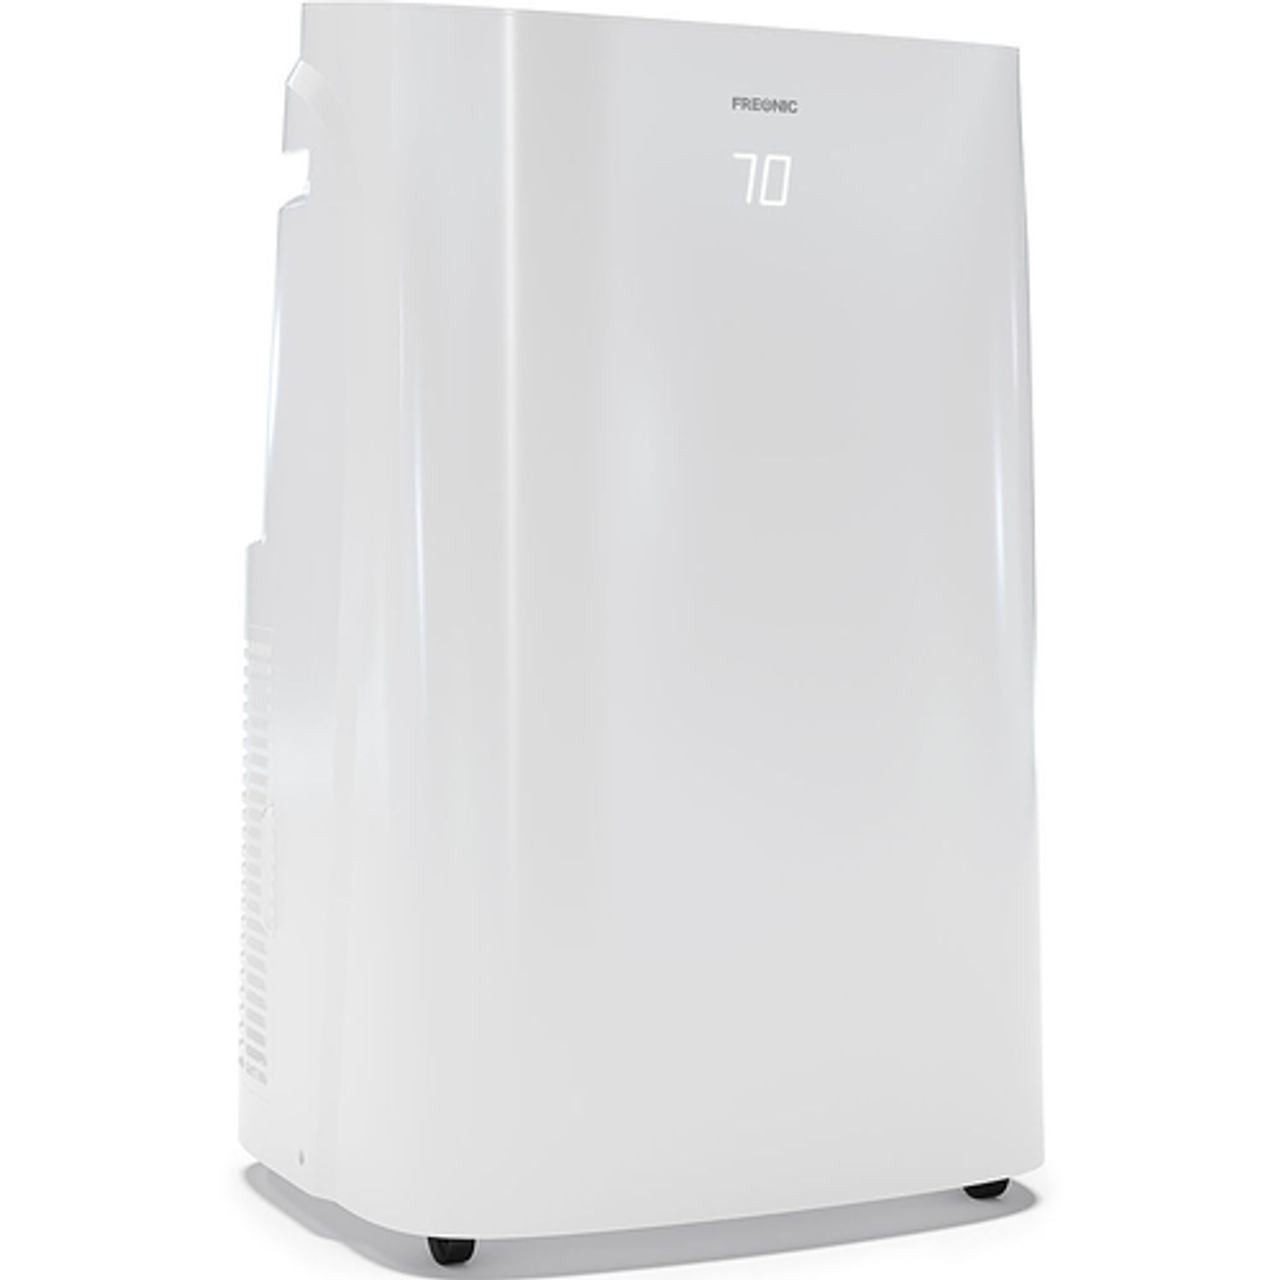 Freonic - 10,000 BTU Portable Air Conditioner with Heat | For Rooms up to 450 Sq.Ft. | LED Display | Sleep Mode | Dehumidifier - White